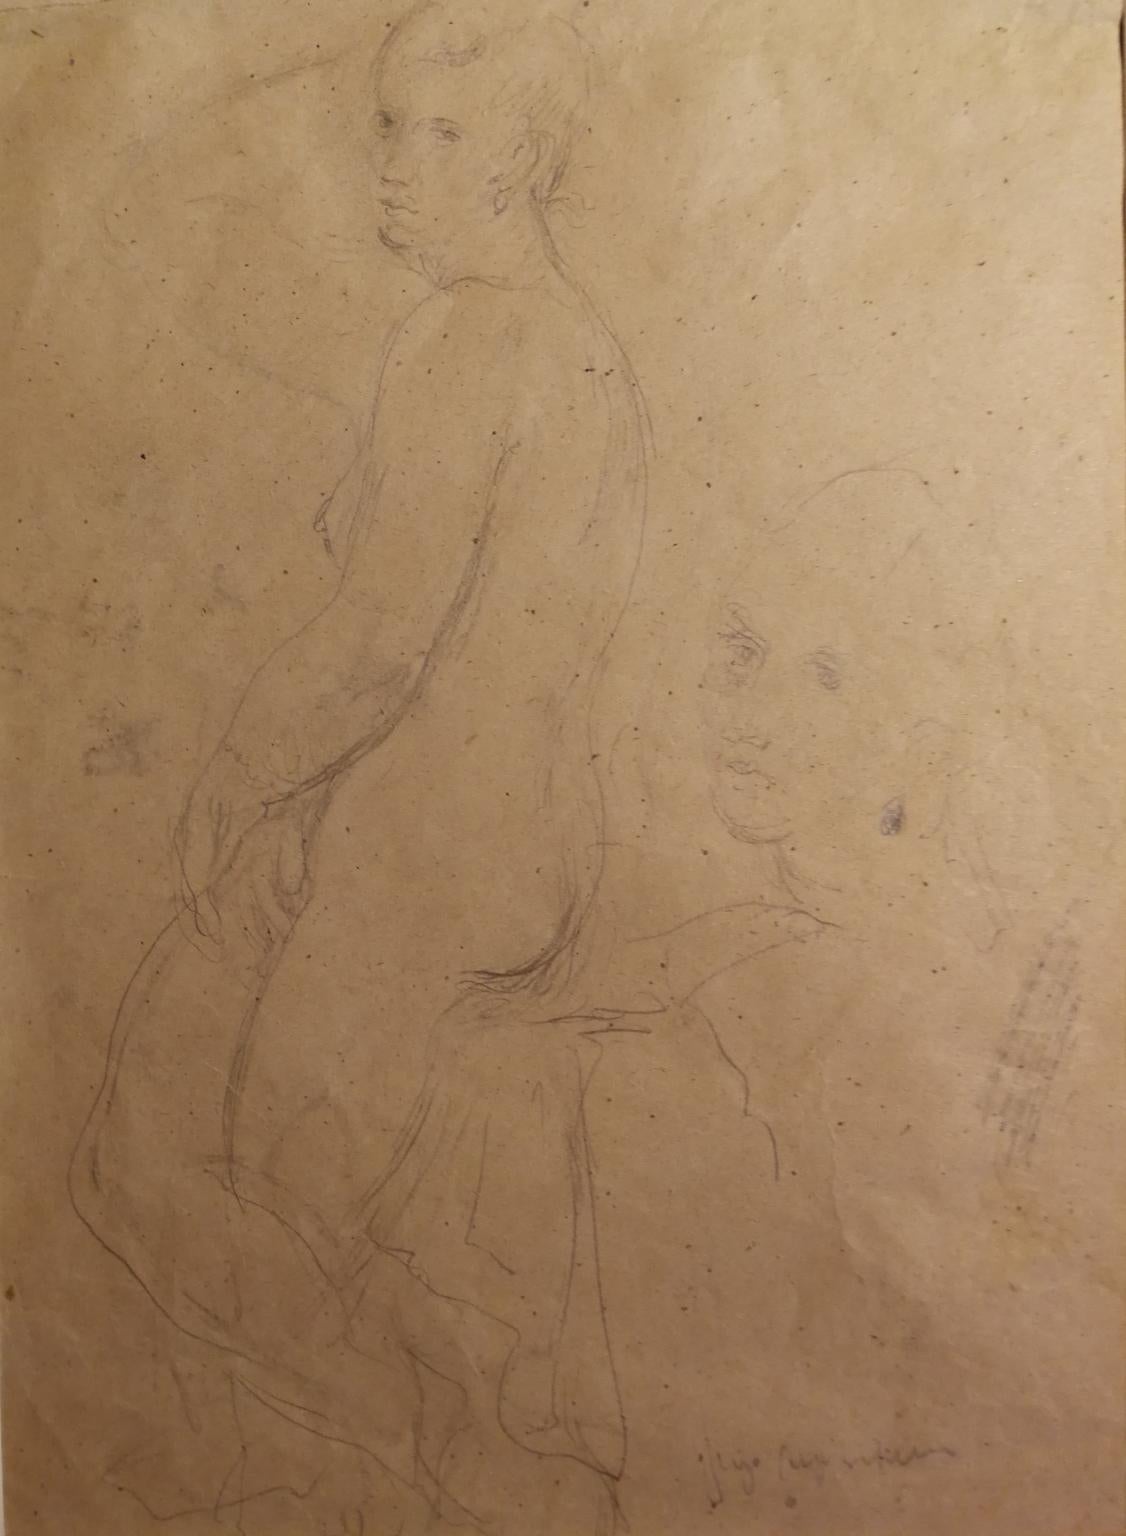 Tuscan Florentine Female Nude Portrait Drawing 20th century pencil paper - Other Art Style Art by Ugo Capocchini